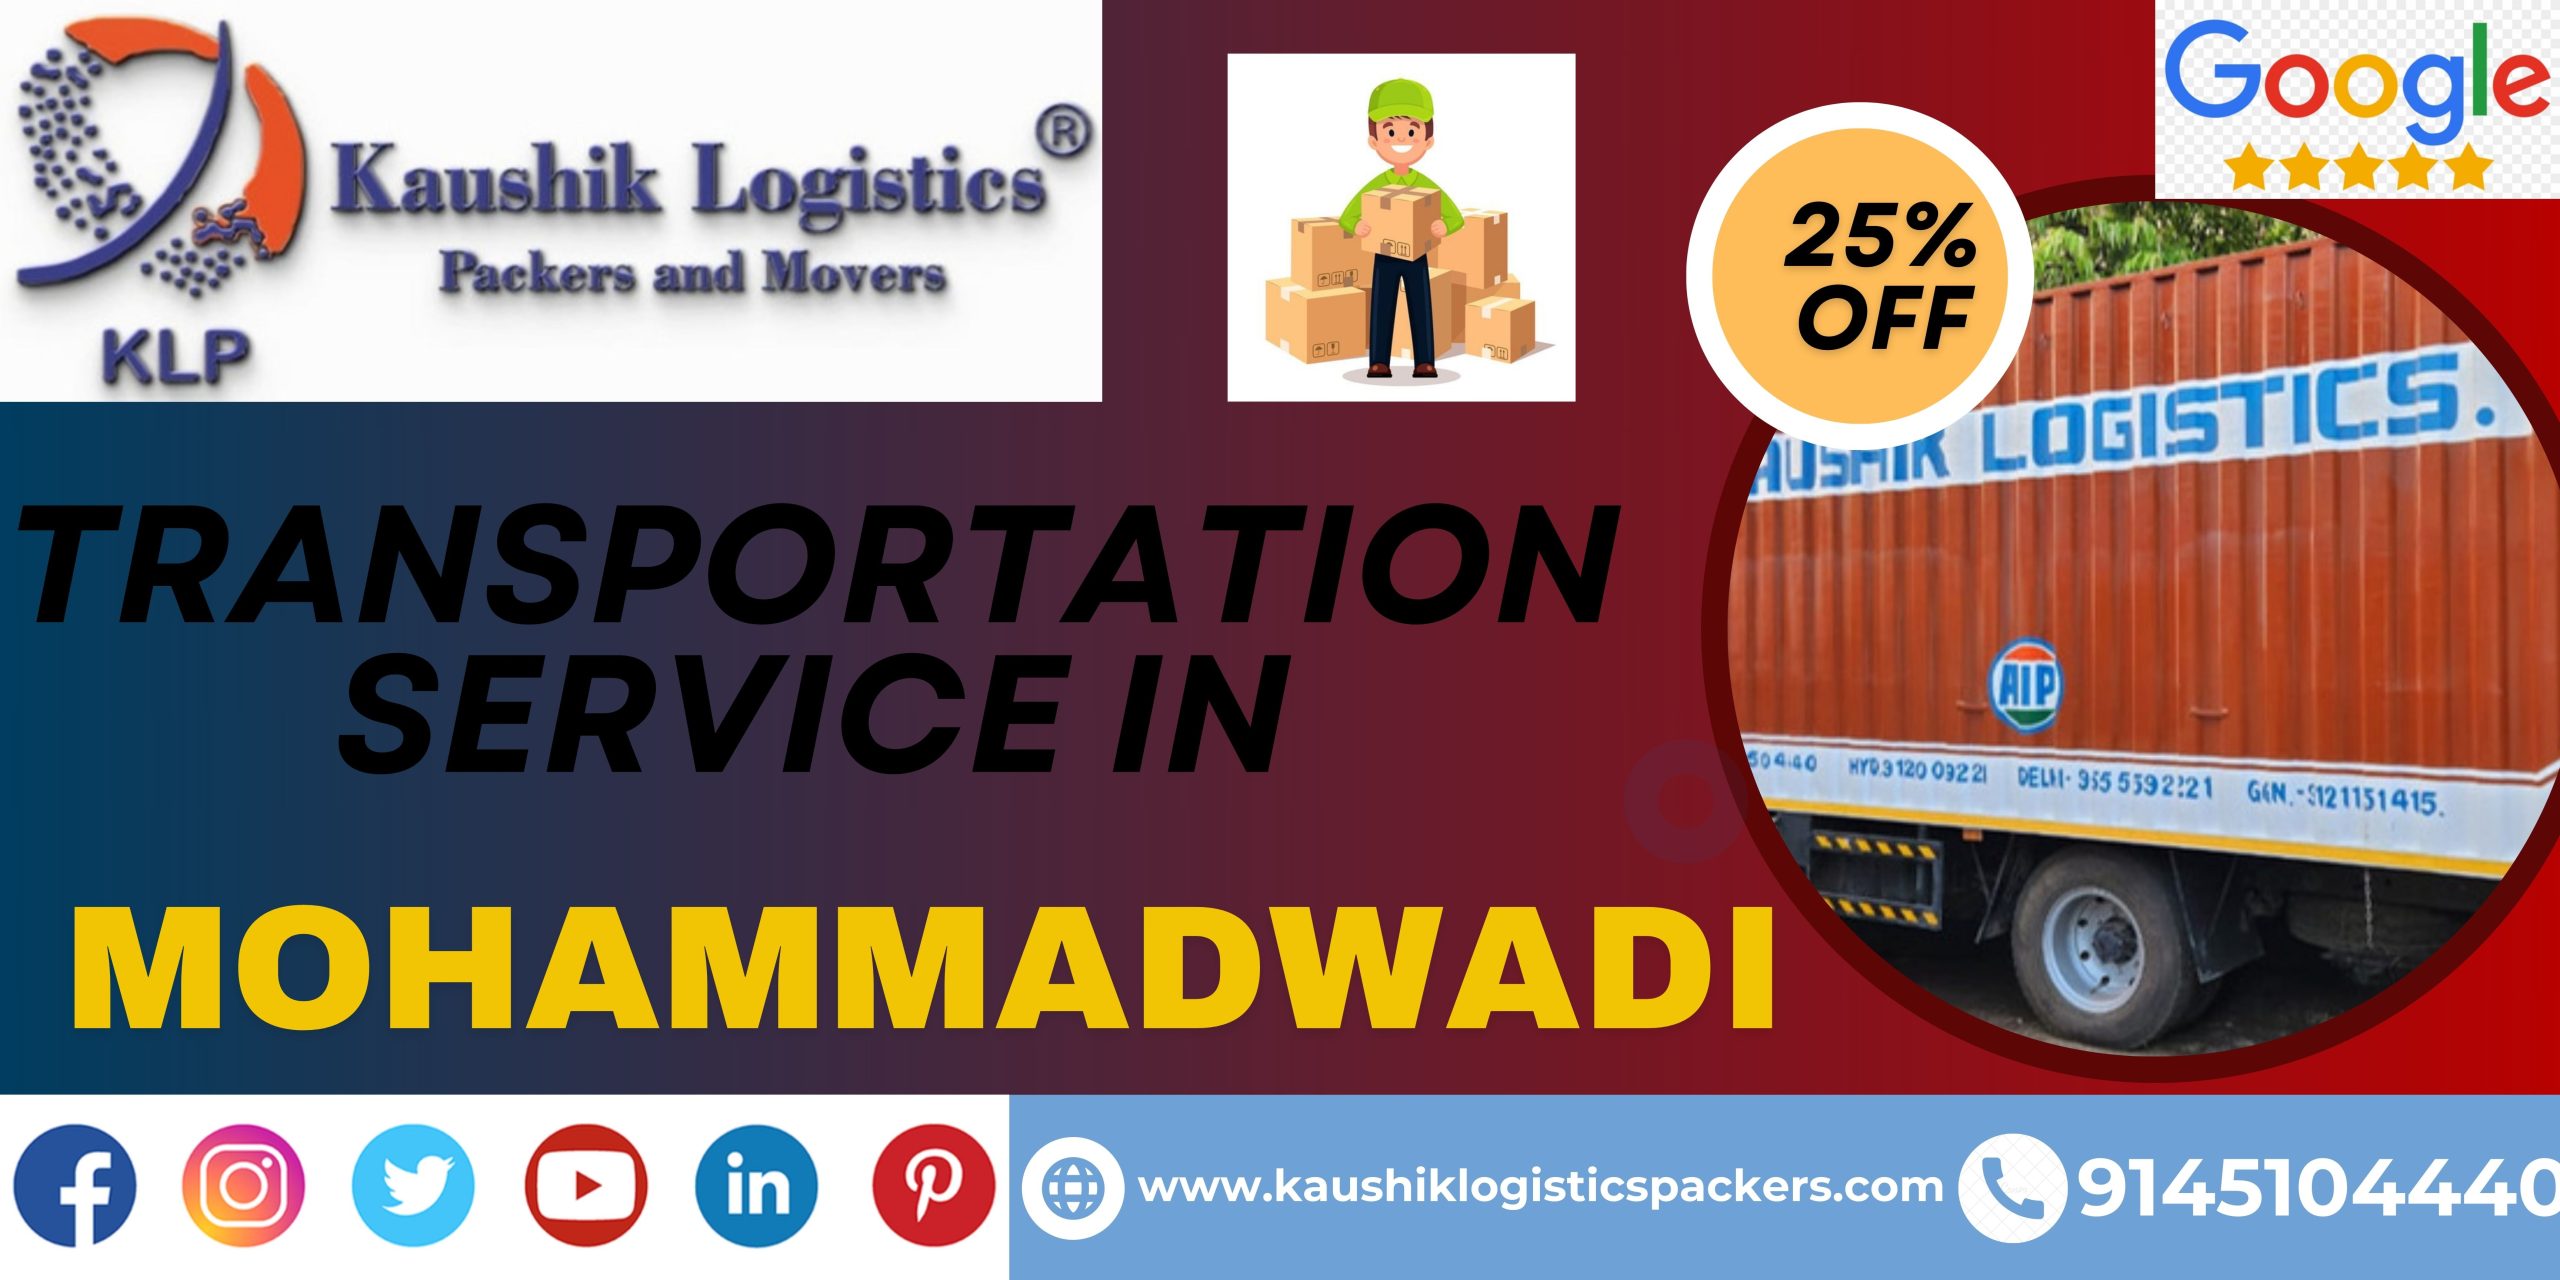 Packers and Movers In Mohammadwadi